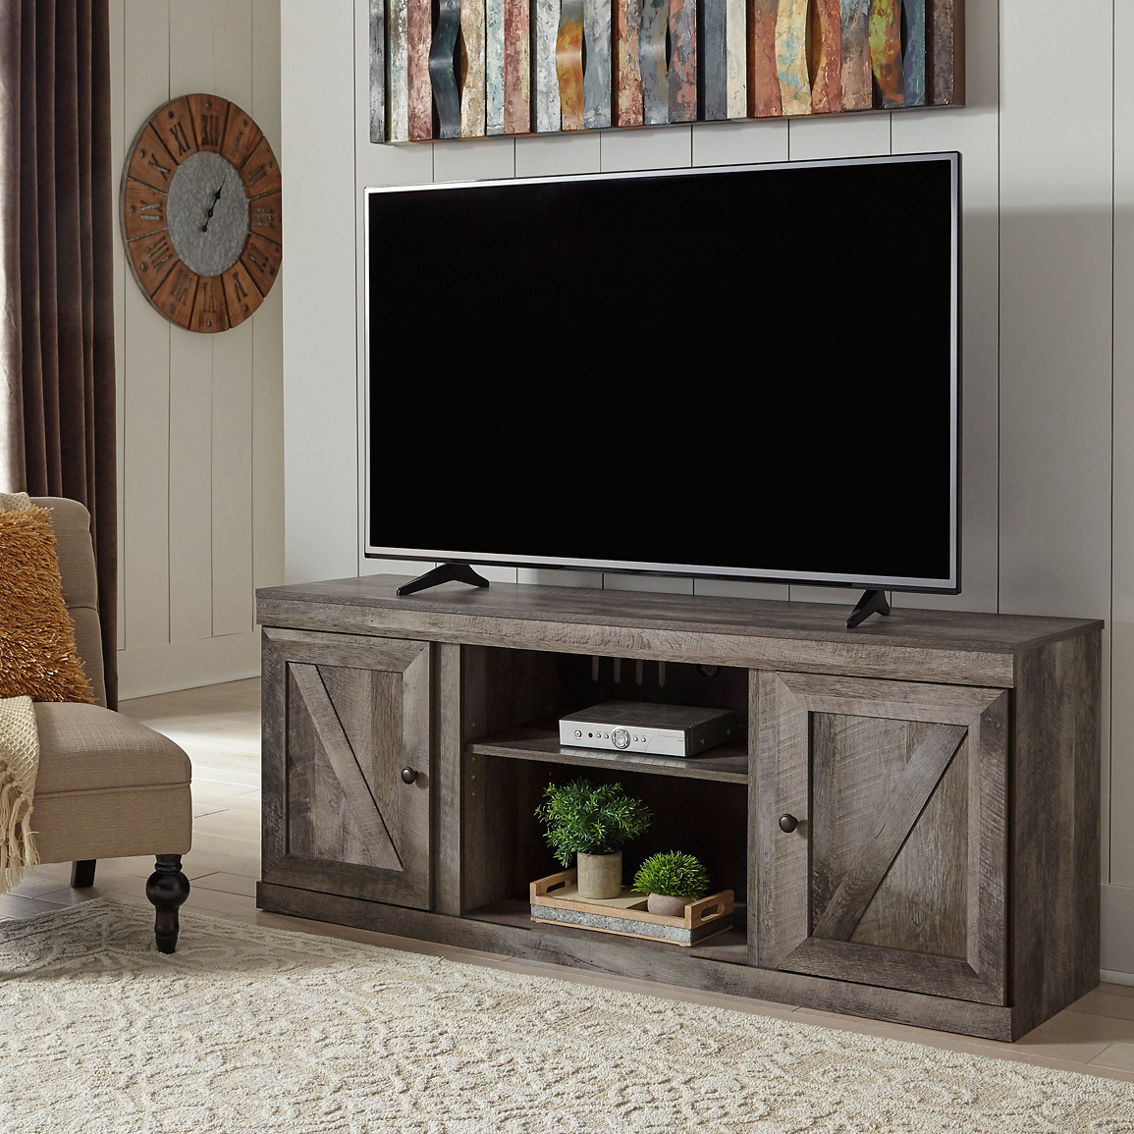 Signature Design by Ashley Wynnlow RTA 60 in. TV Stand - Image 5 of 5